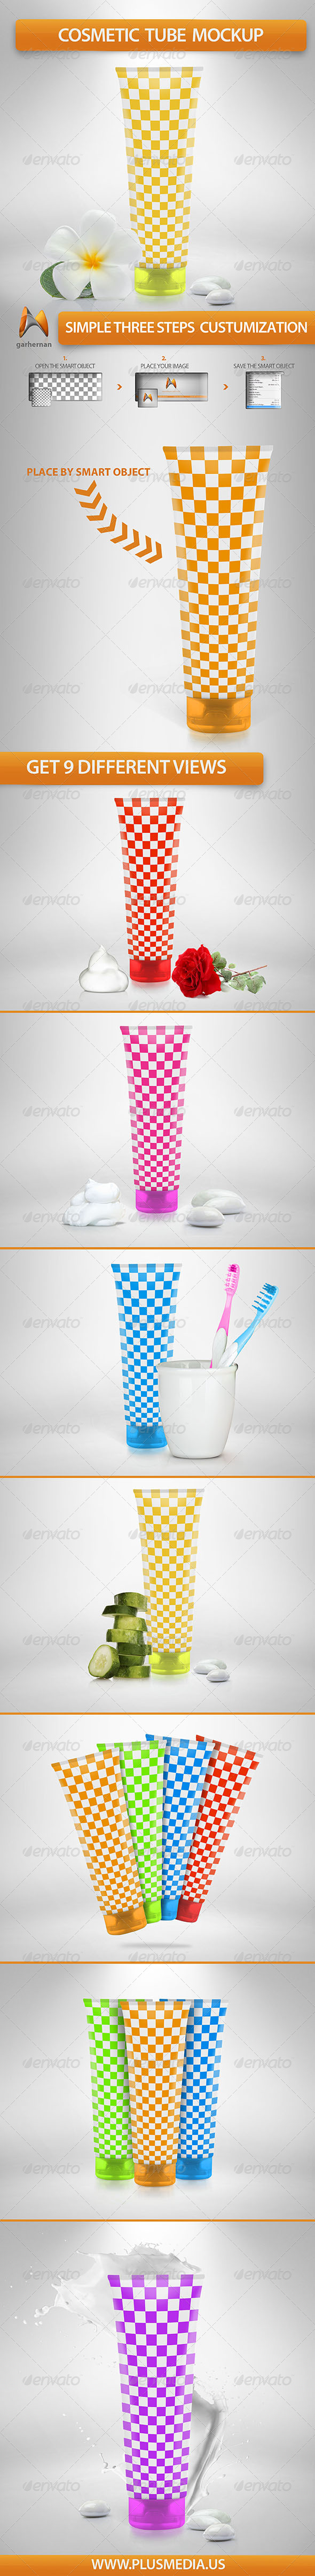 Download Cosmetic Tube Mockup Graphics Designs Templates